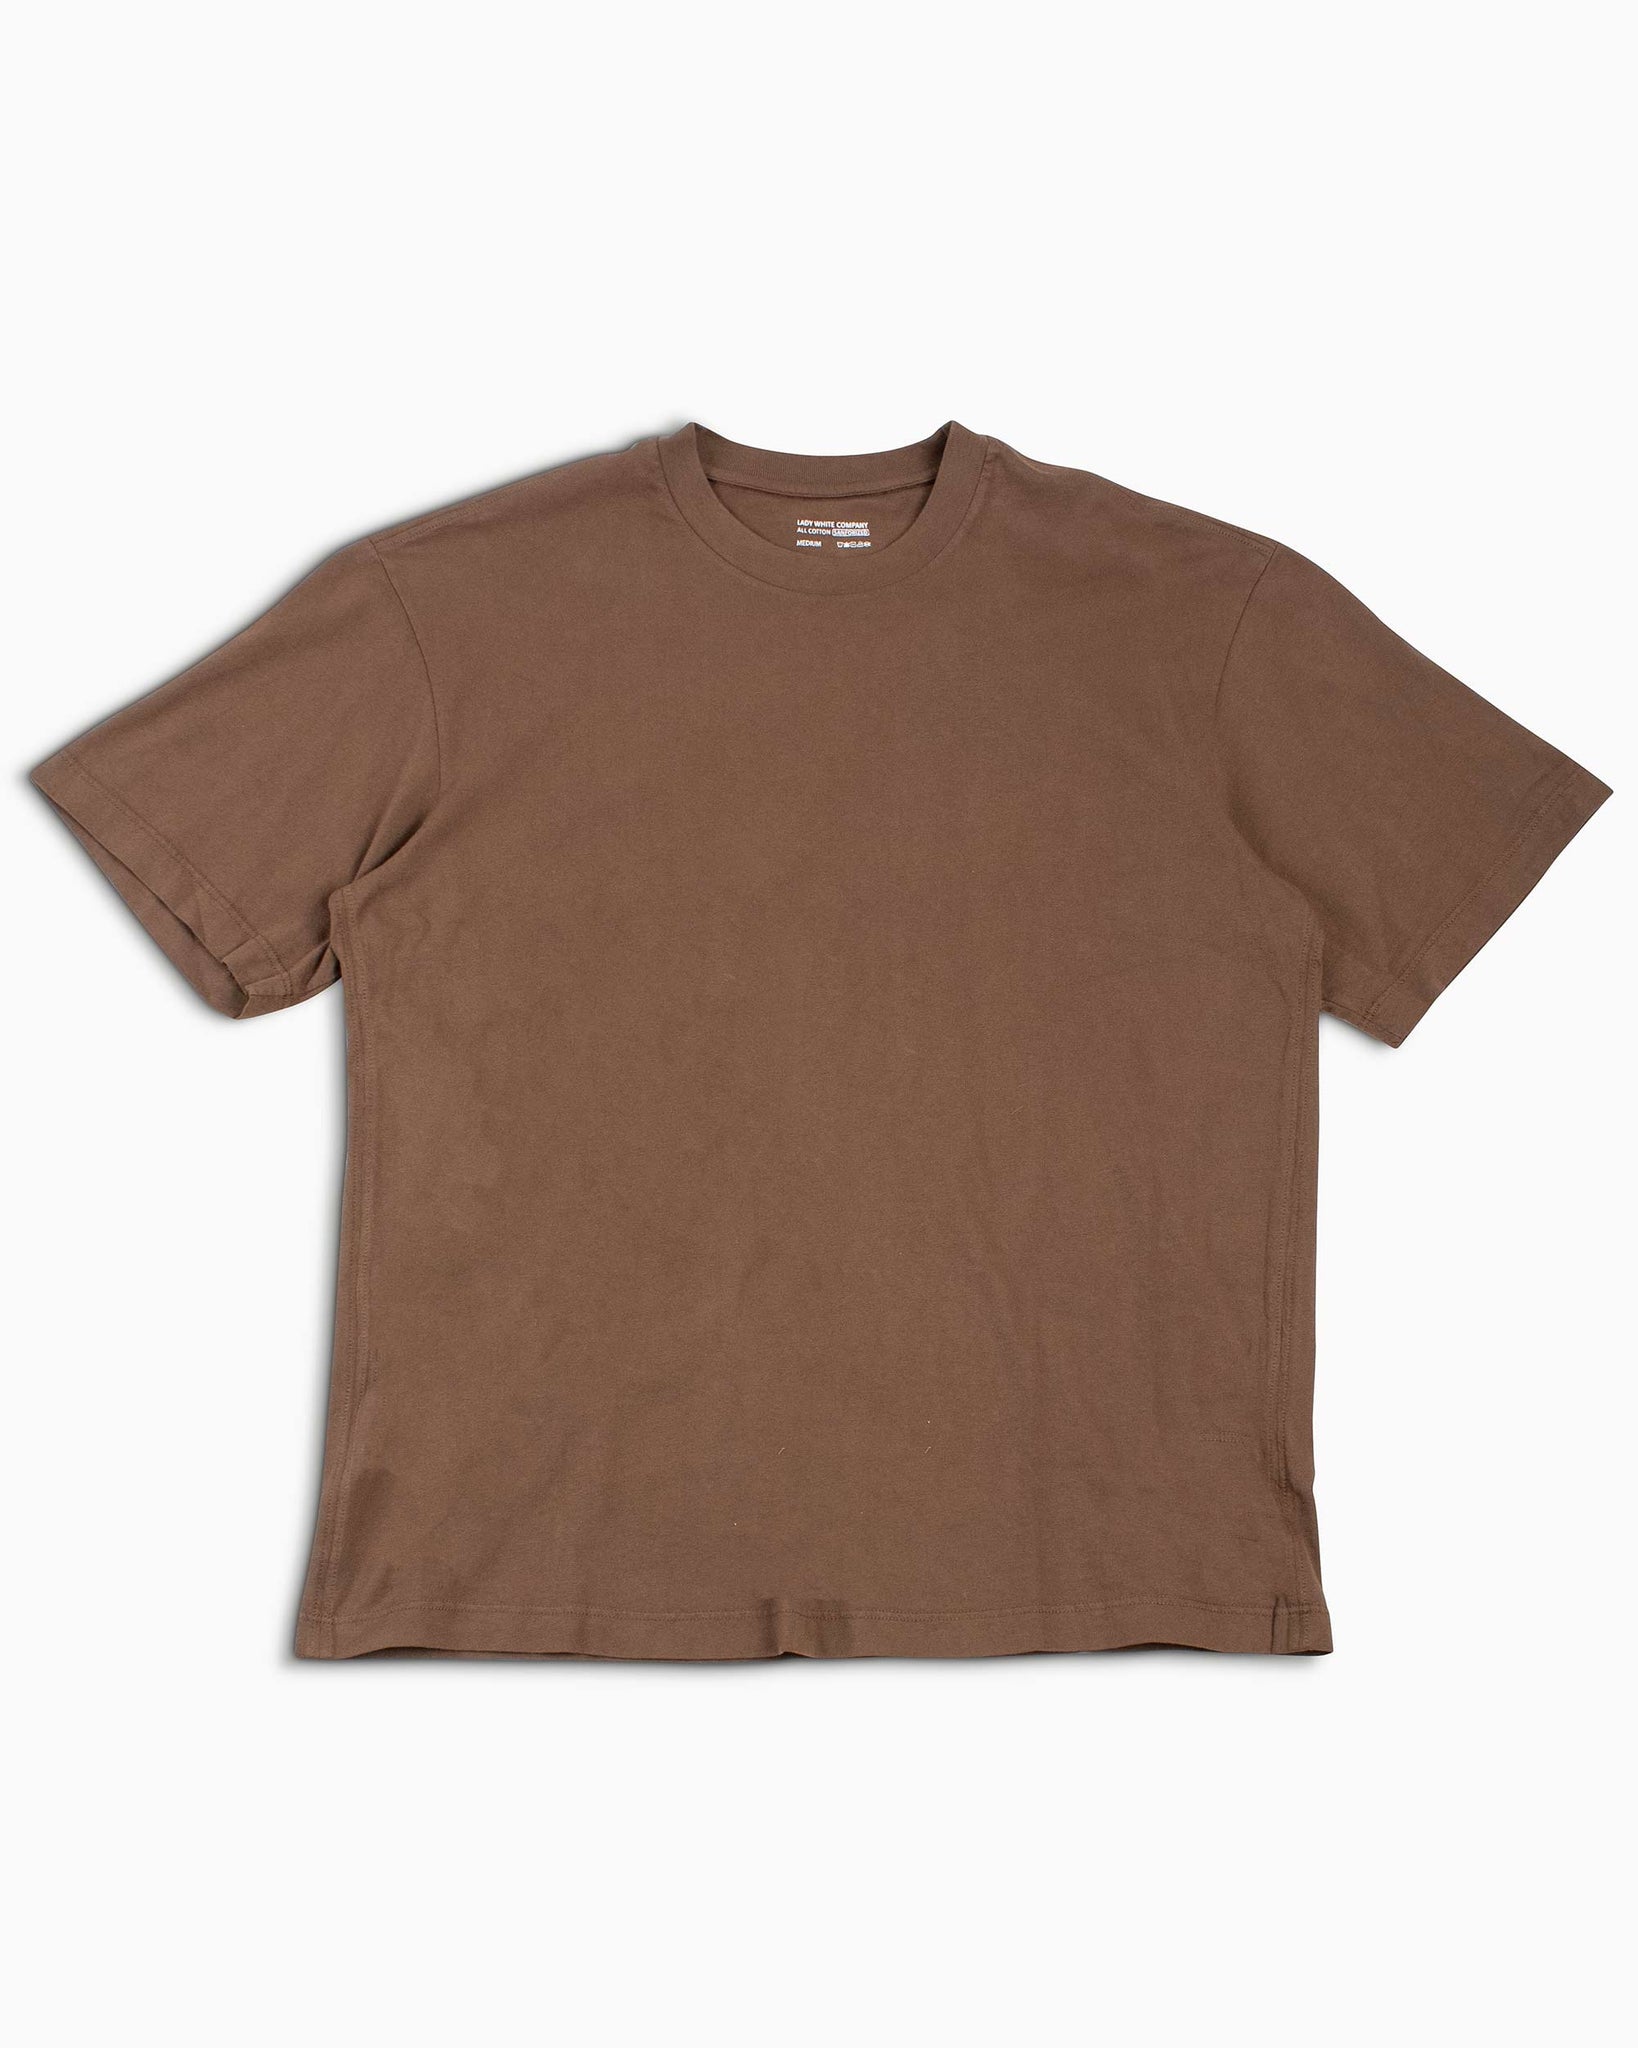 Lady White Co. Athens T-Shirt Dark Taupe